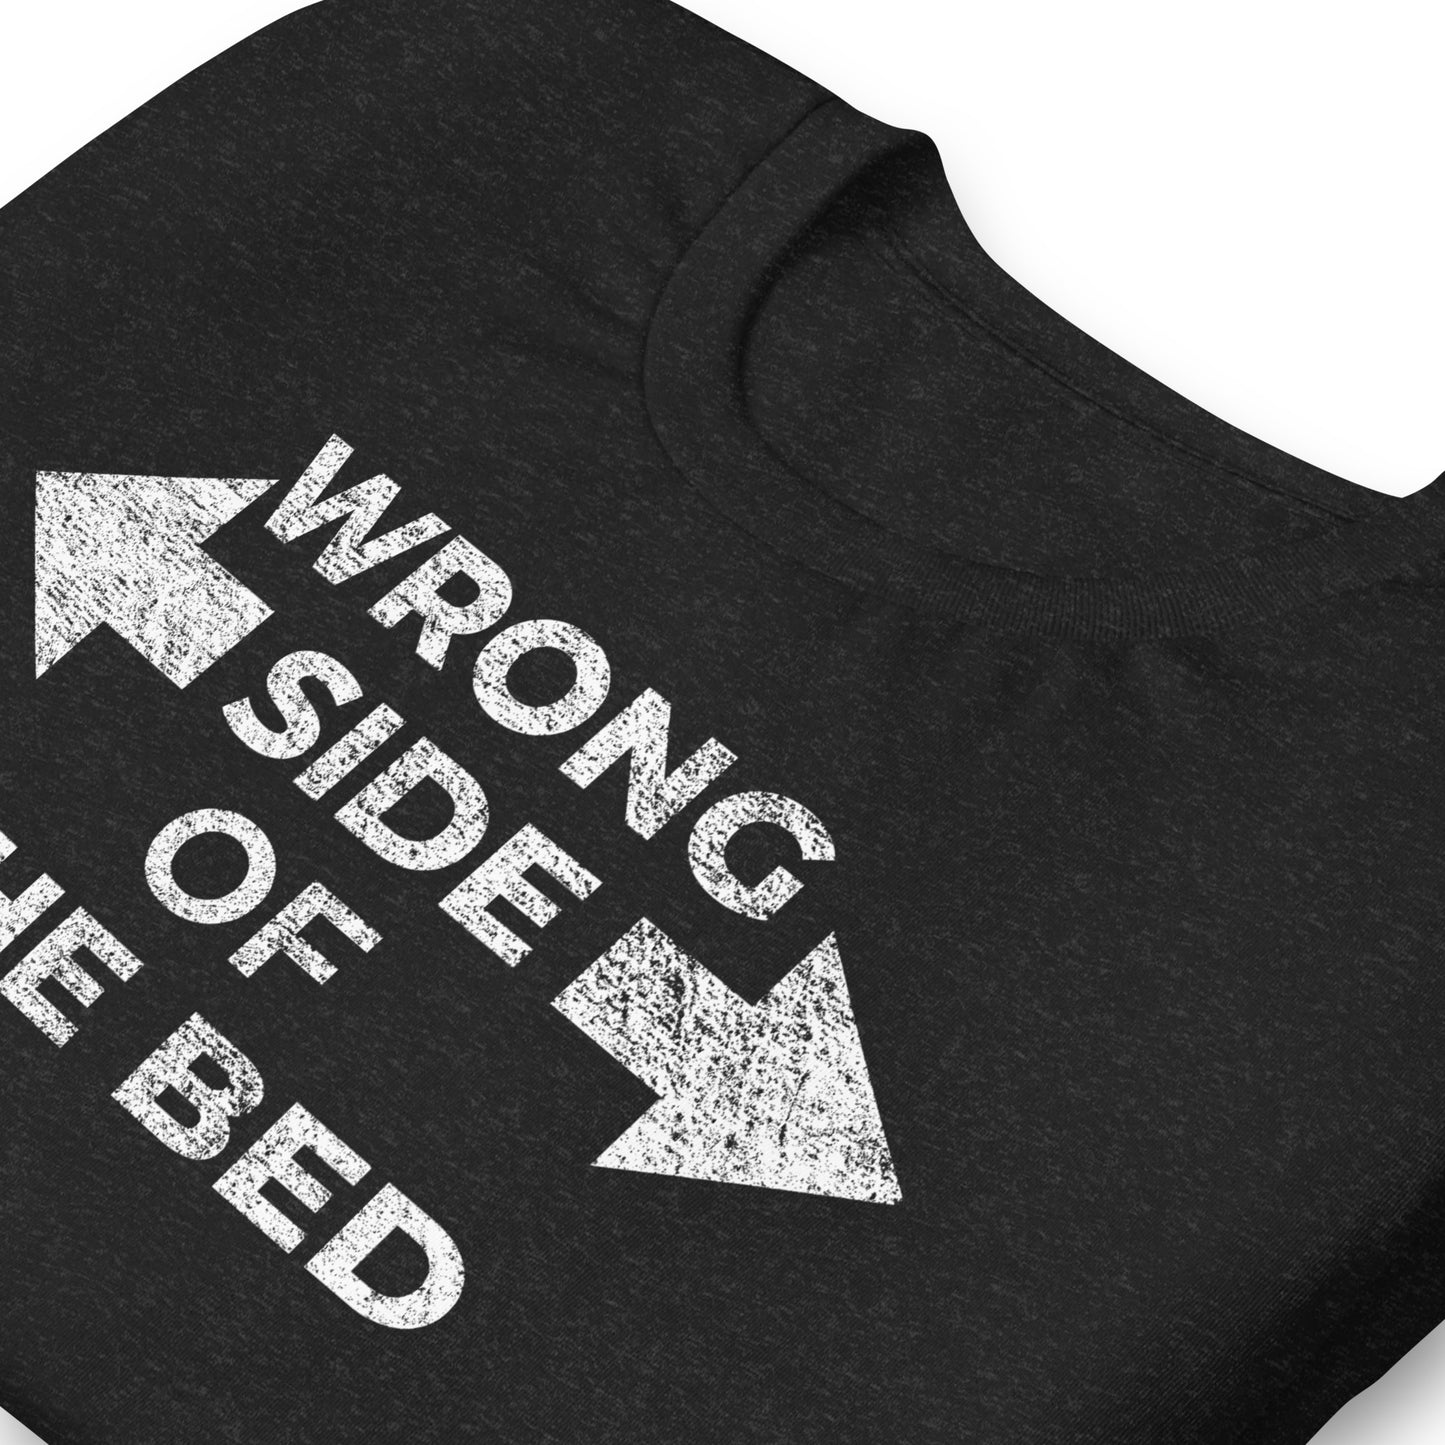 WRONG SIDE OF THE BED, Graphic Tee Shirt, Black